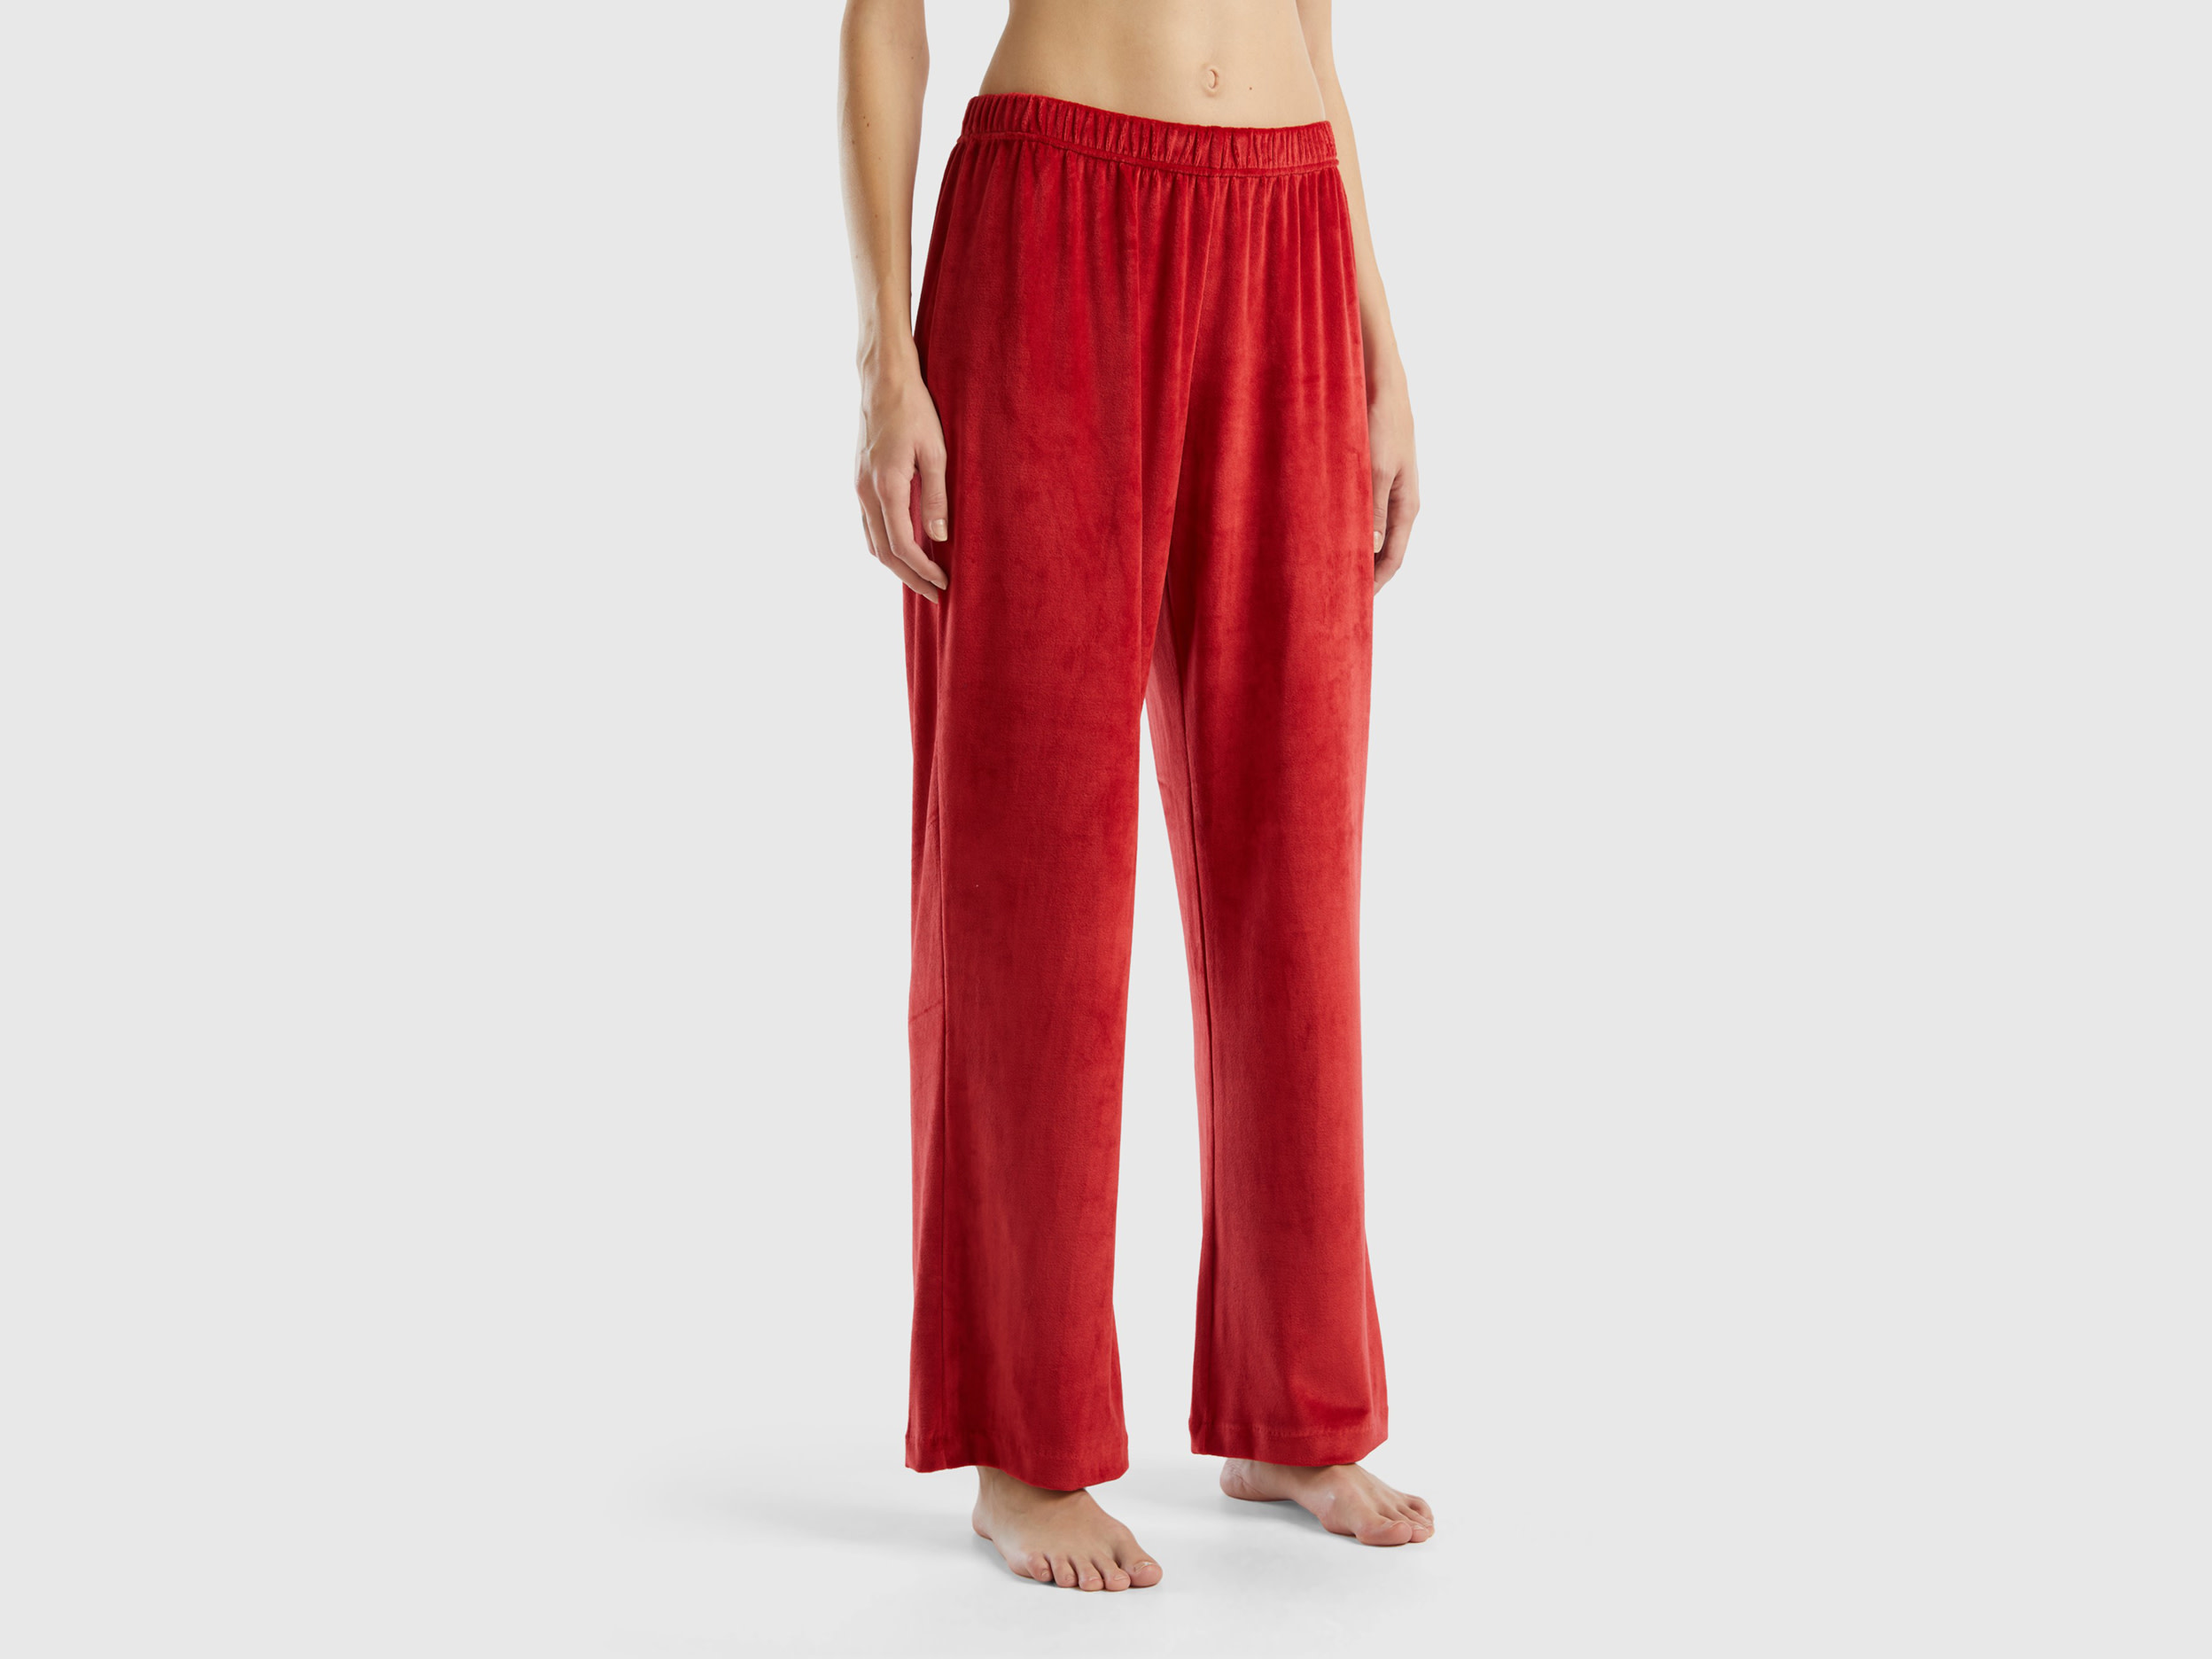 Benetton, Velour Palazzo Trousers, size M, Red, Women